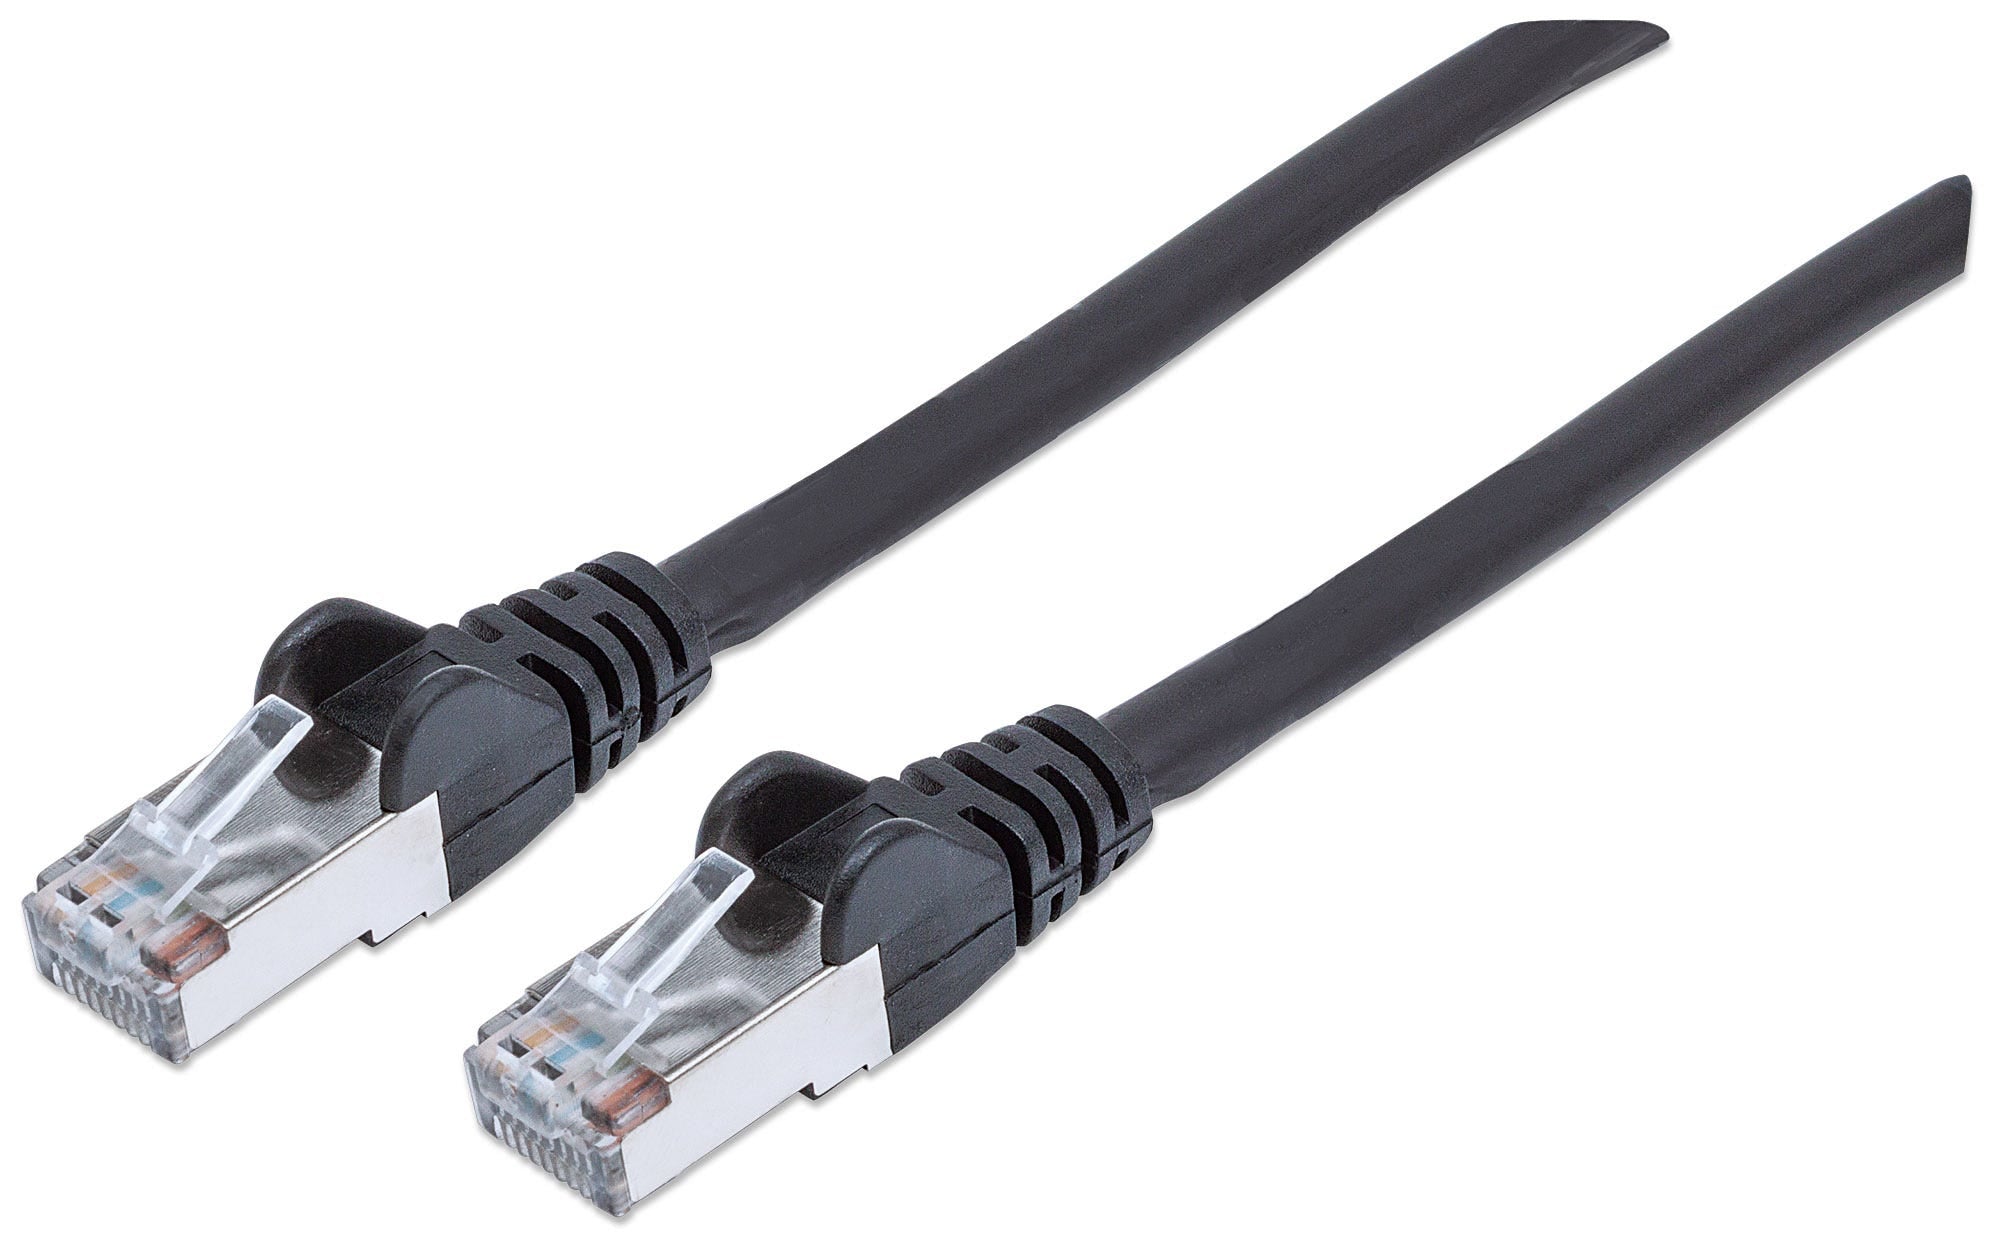 Intellinet Network Patch Cable, Cat6, 3m, Black, Copper, S/FTP, LSOH / LSZH, PVC, RJ45, Gold Plated Contacts, Snagless, Booted, Lifetime Warranty, Polybag